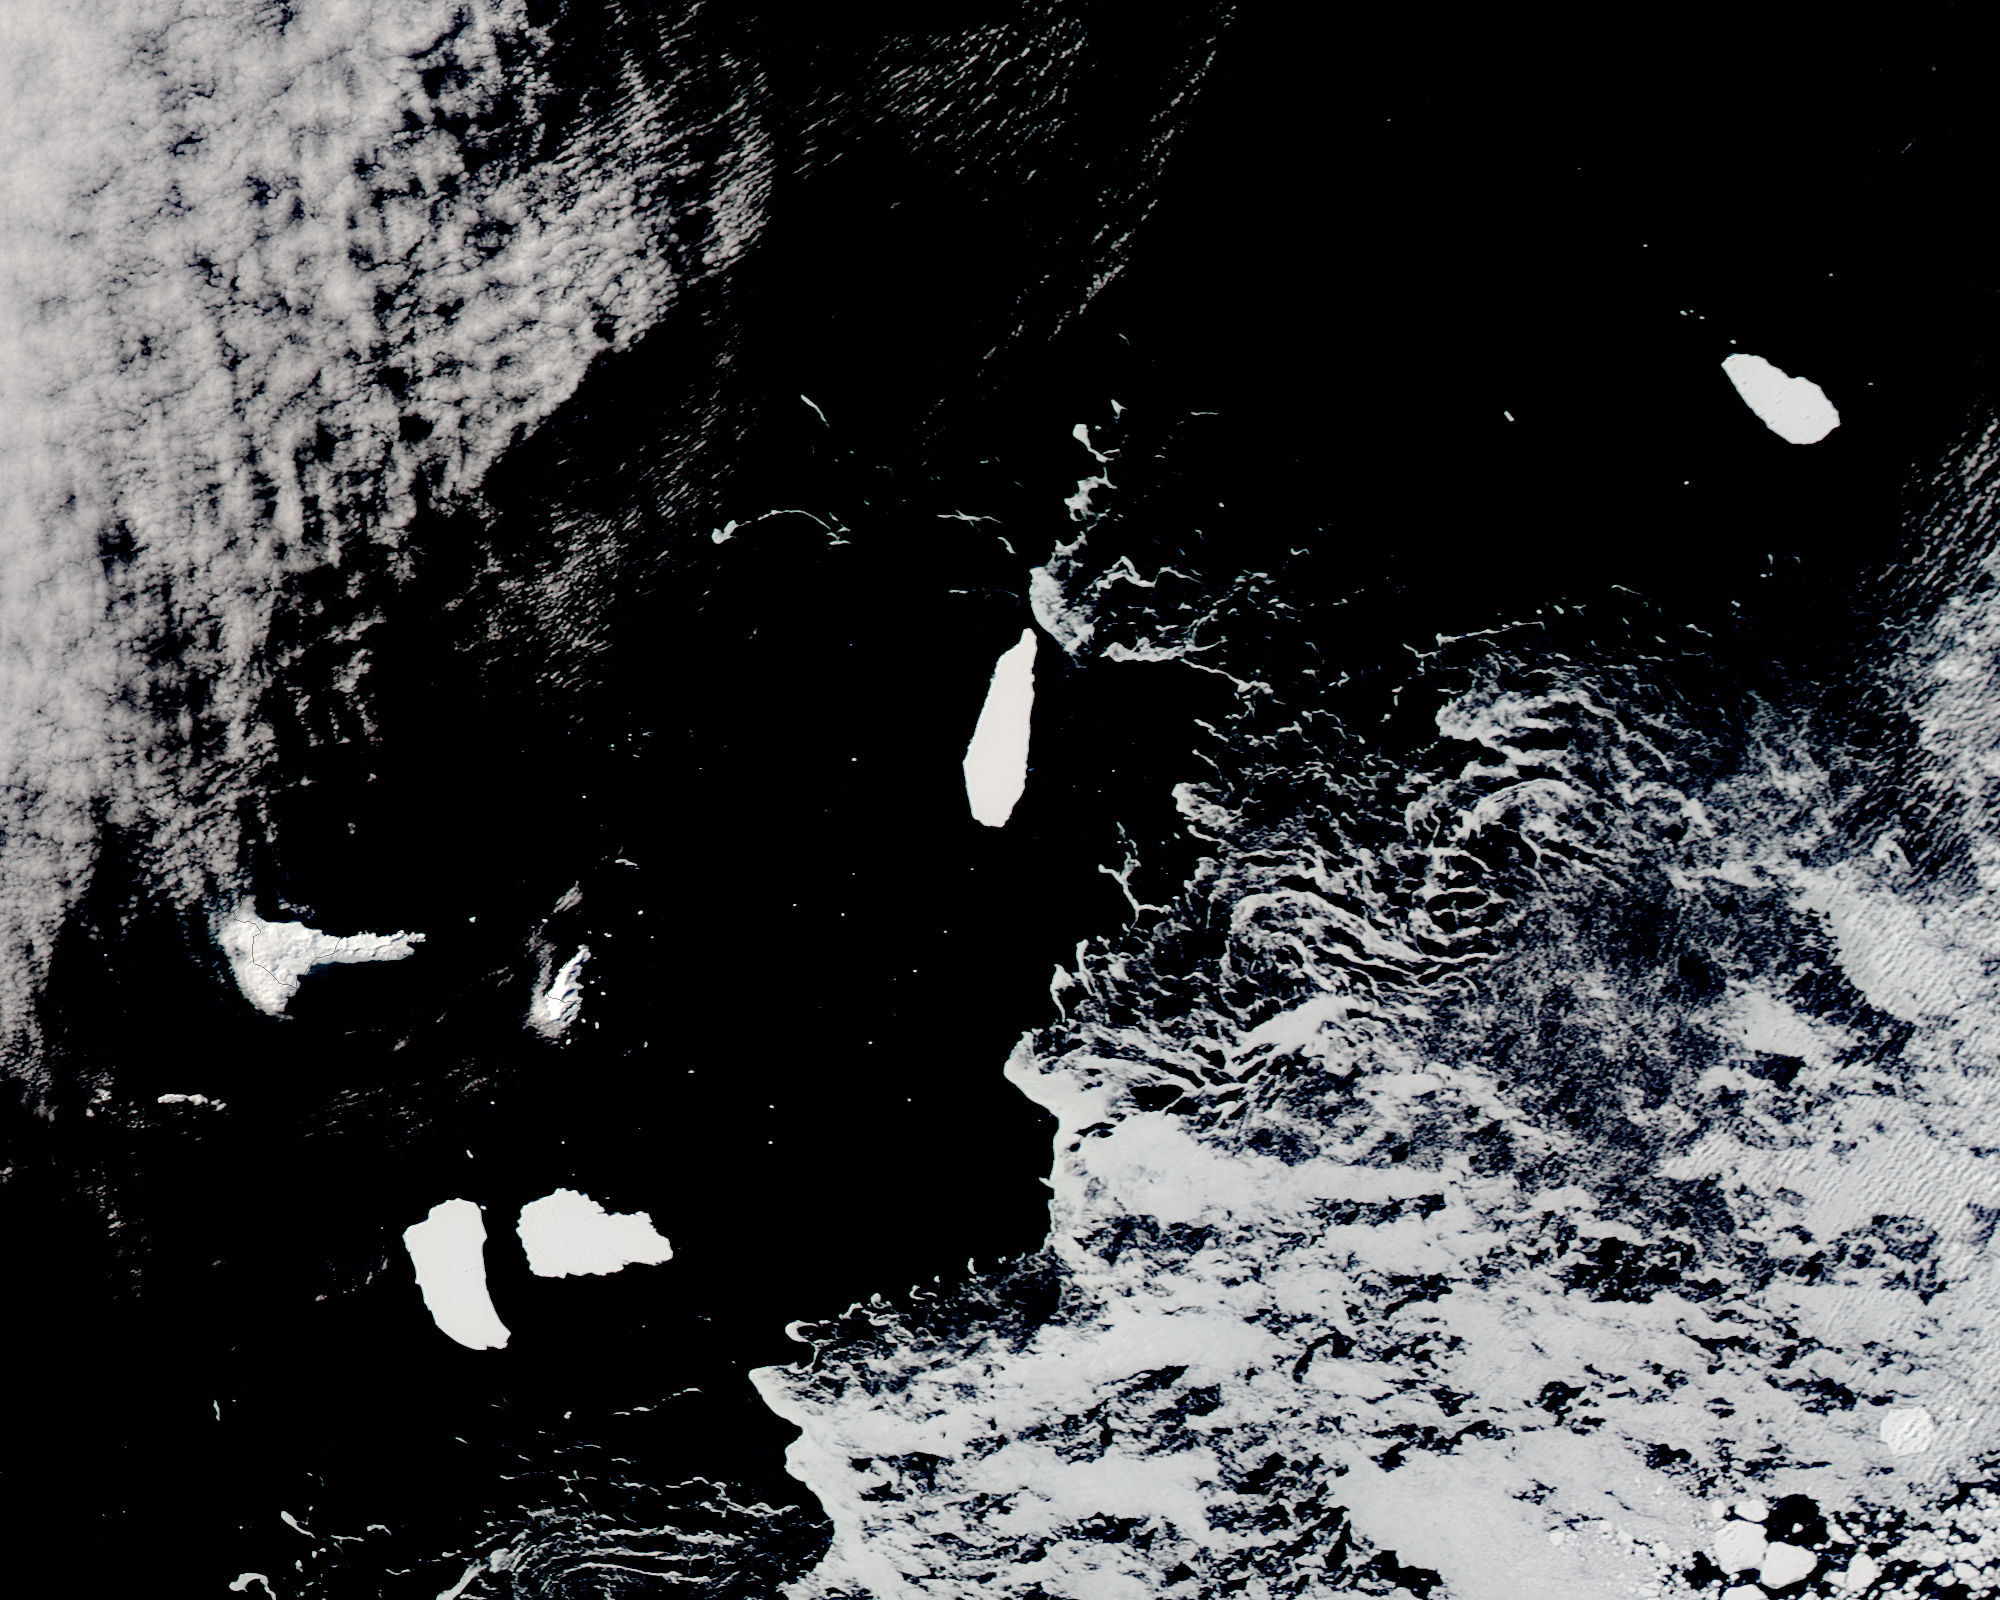 Icebergs B09F, C24, B15T, and B15Z in the South Atlantic Ocean - related image preview